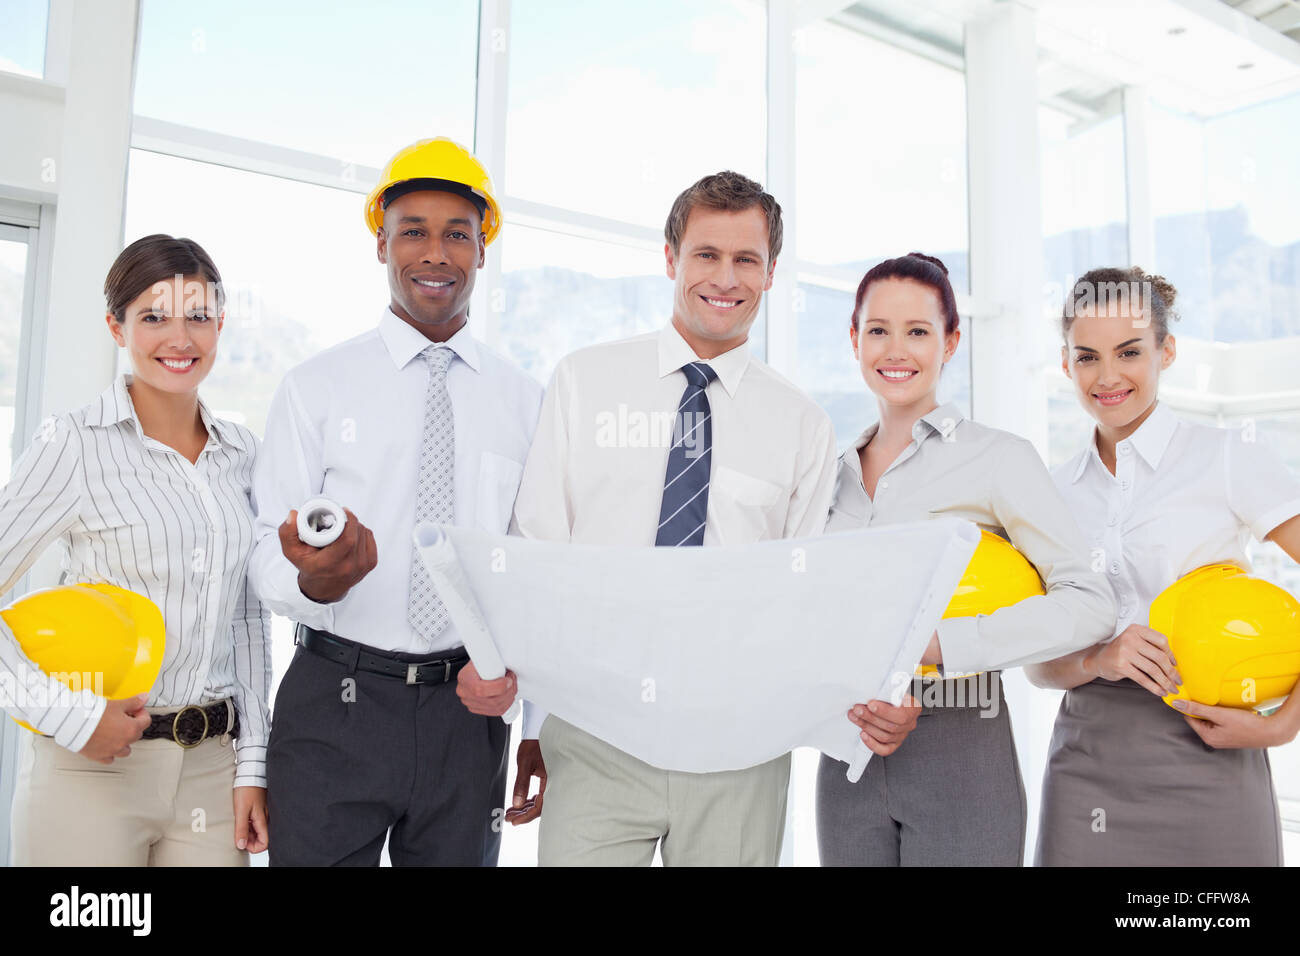 Smiling architects standing together with a blueprint Stock Photo